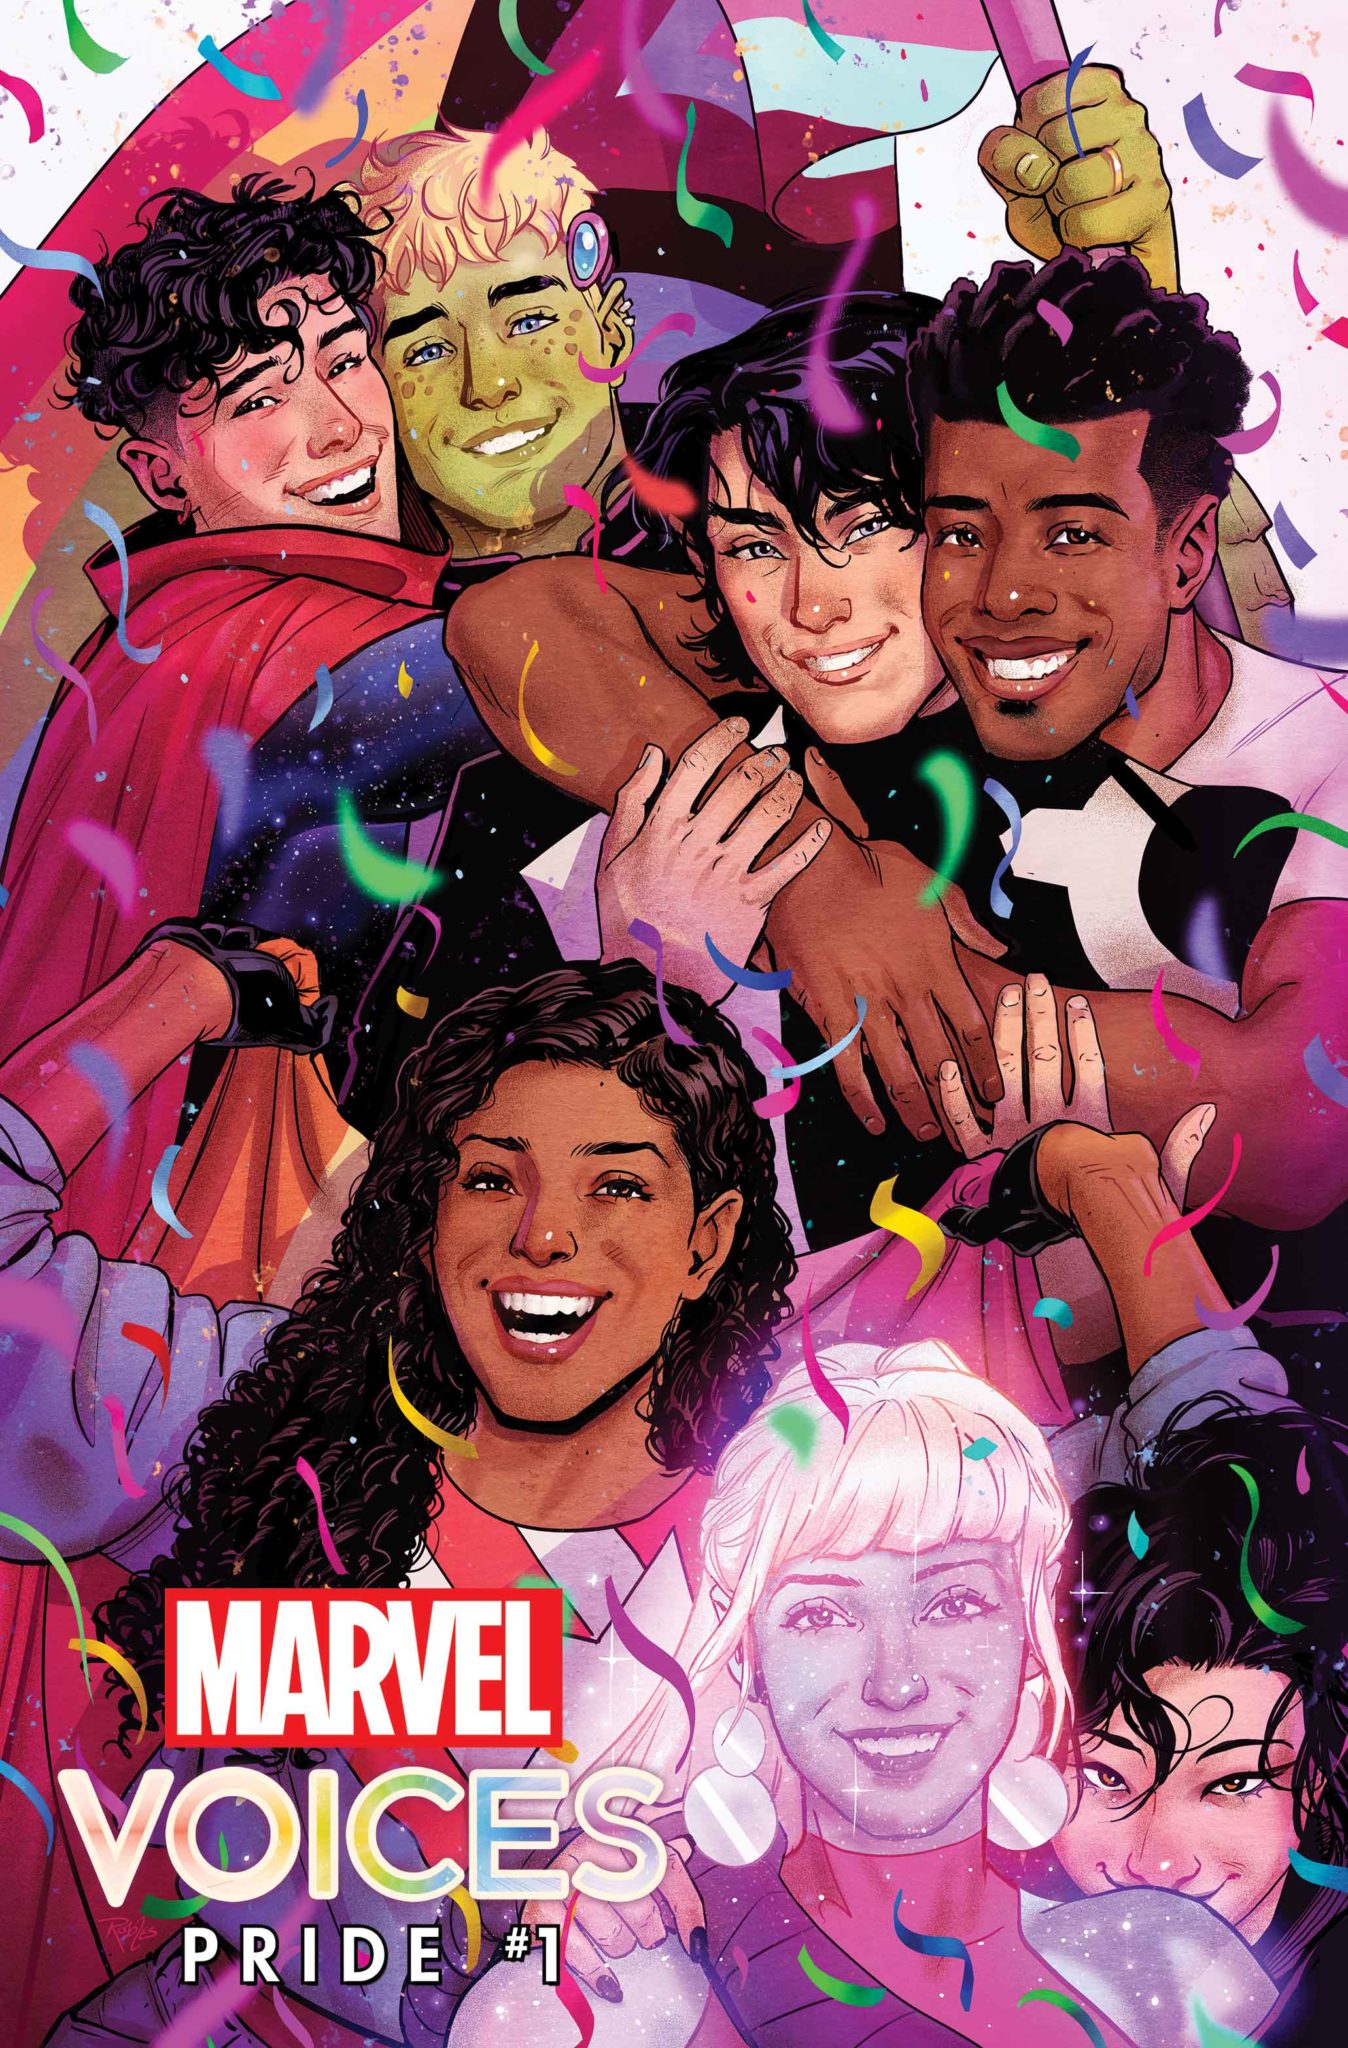 Marvel's Voices Pride cover